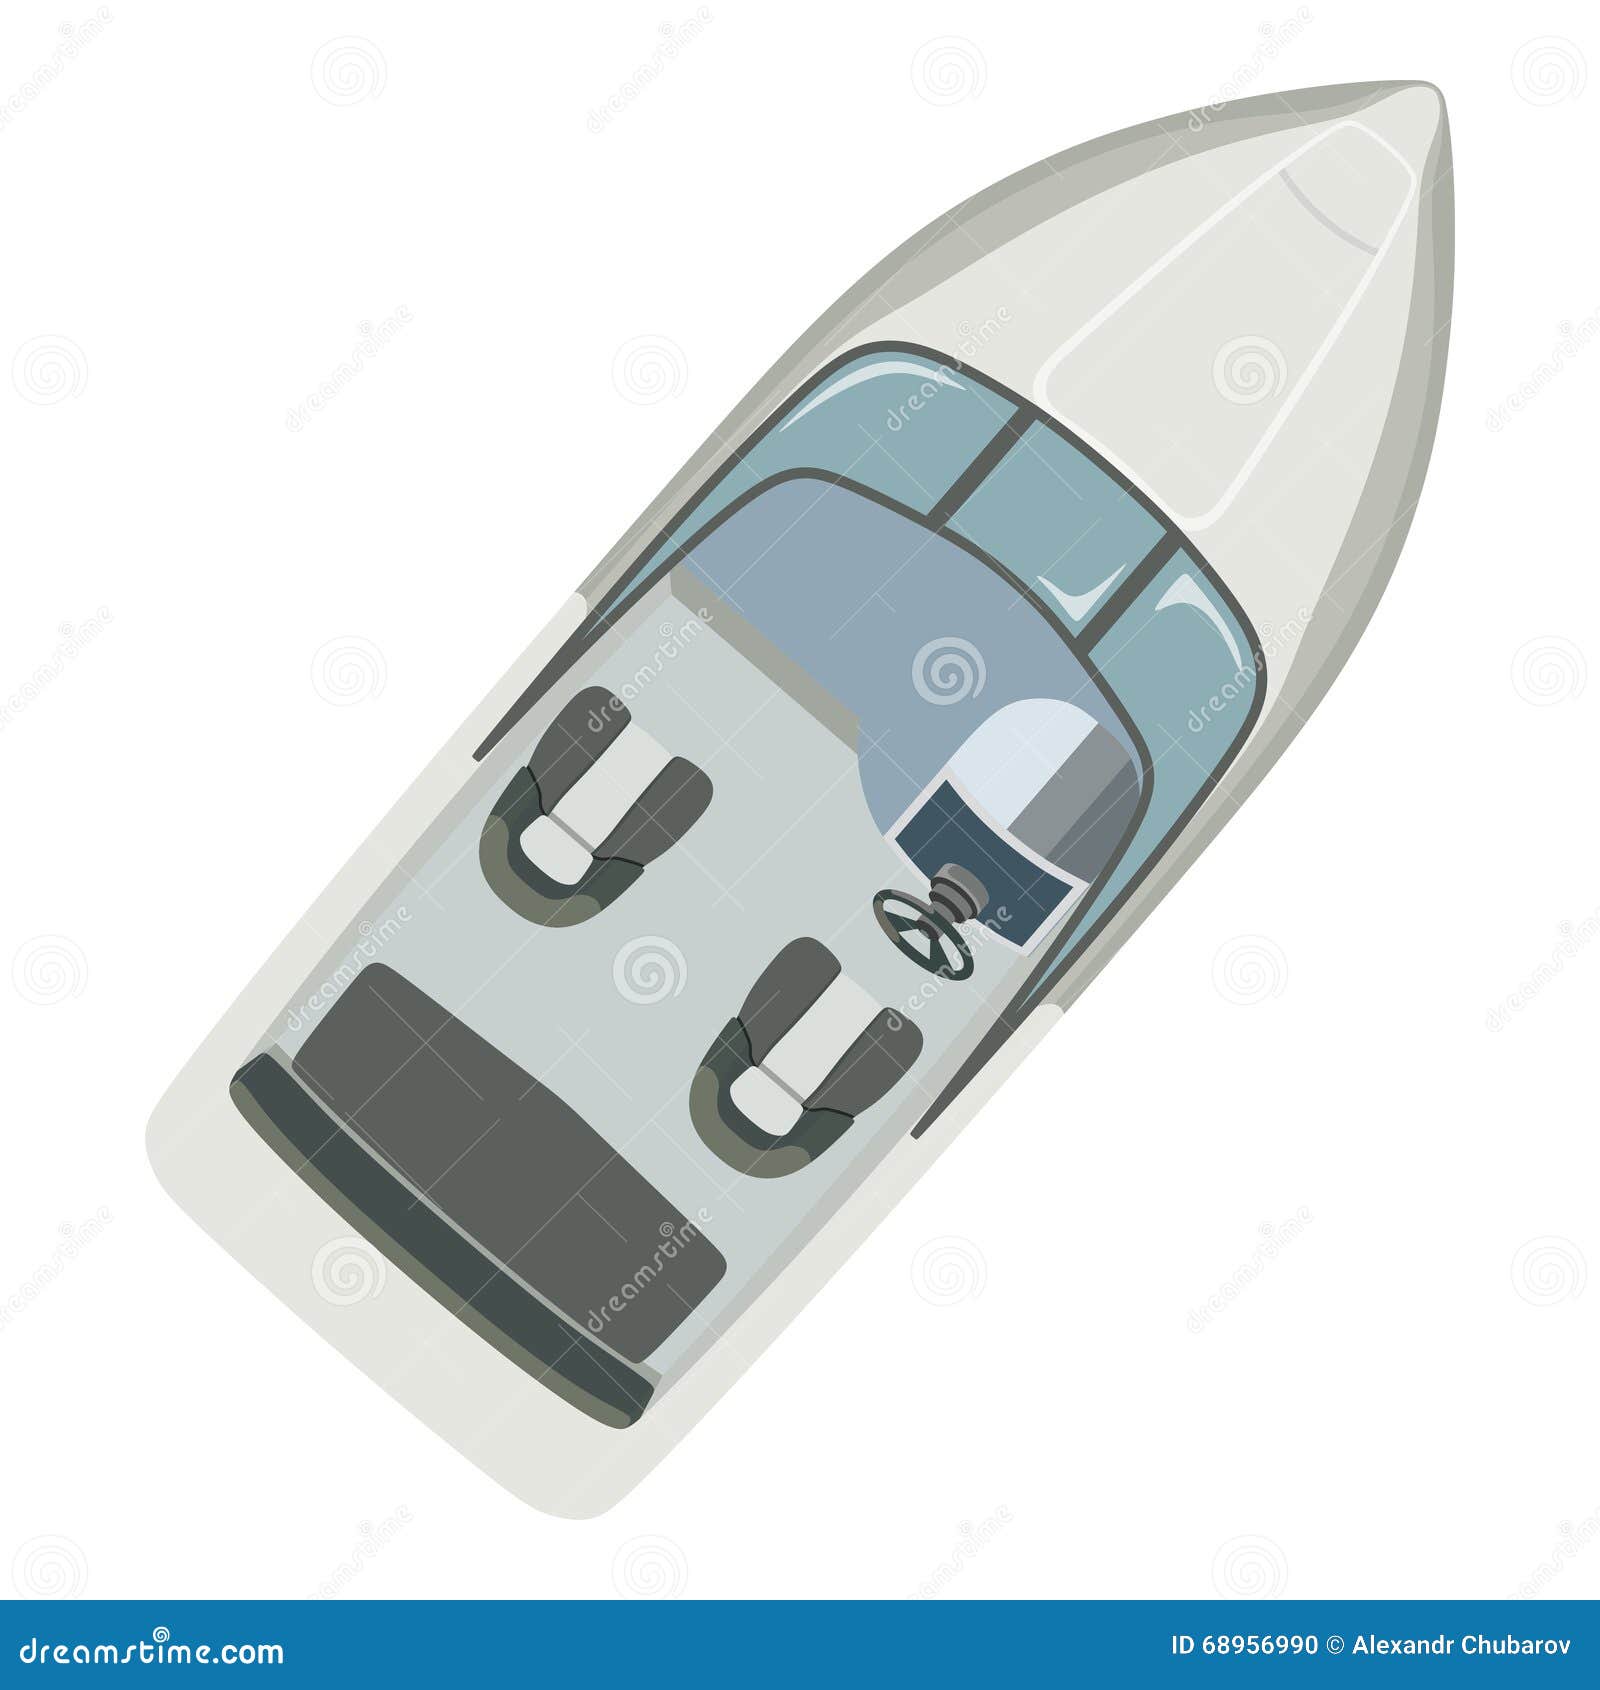 Motorboat Drawing Stock Illustrations – 752 Motorboat Drawing Stock  Illustrations, Vectors & Clipart - Dreamstime